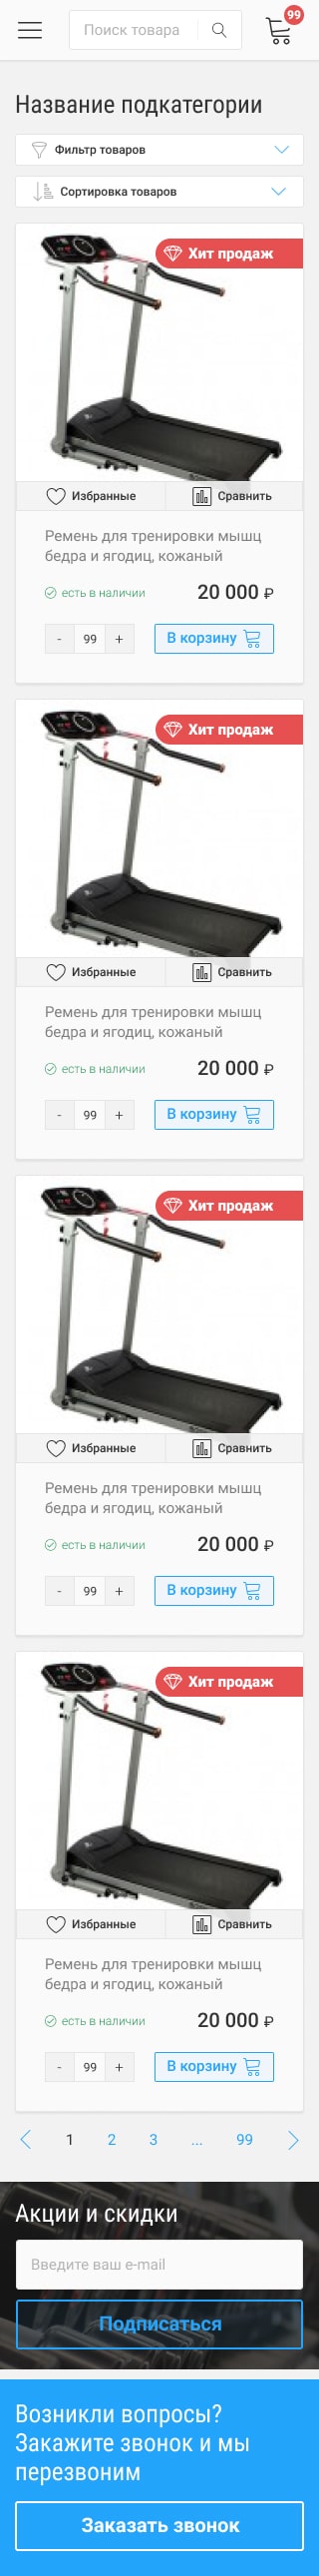 mobile version of catalog page for gym devices designed by Dima Radushev